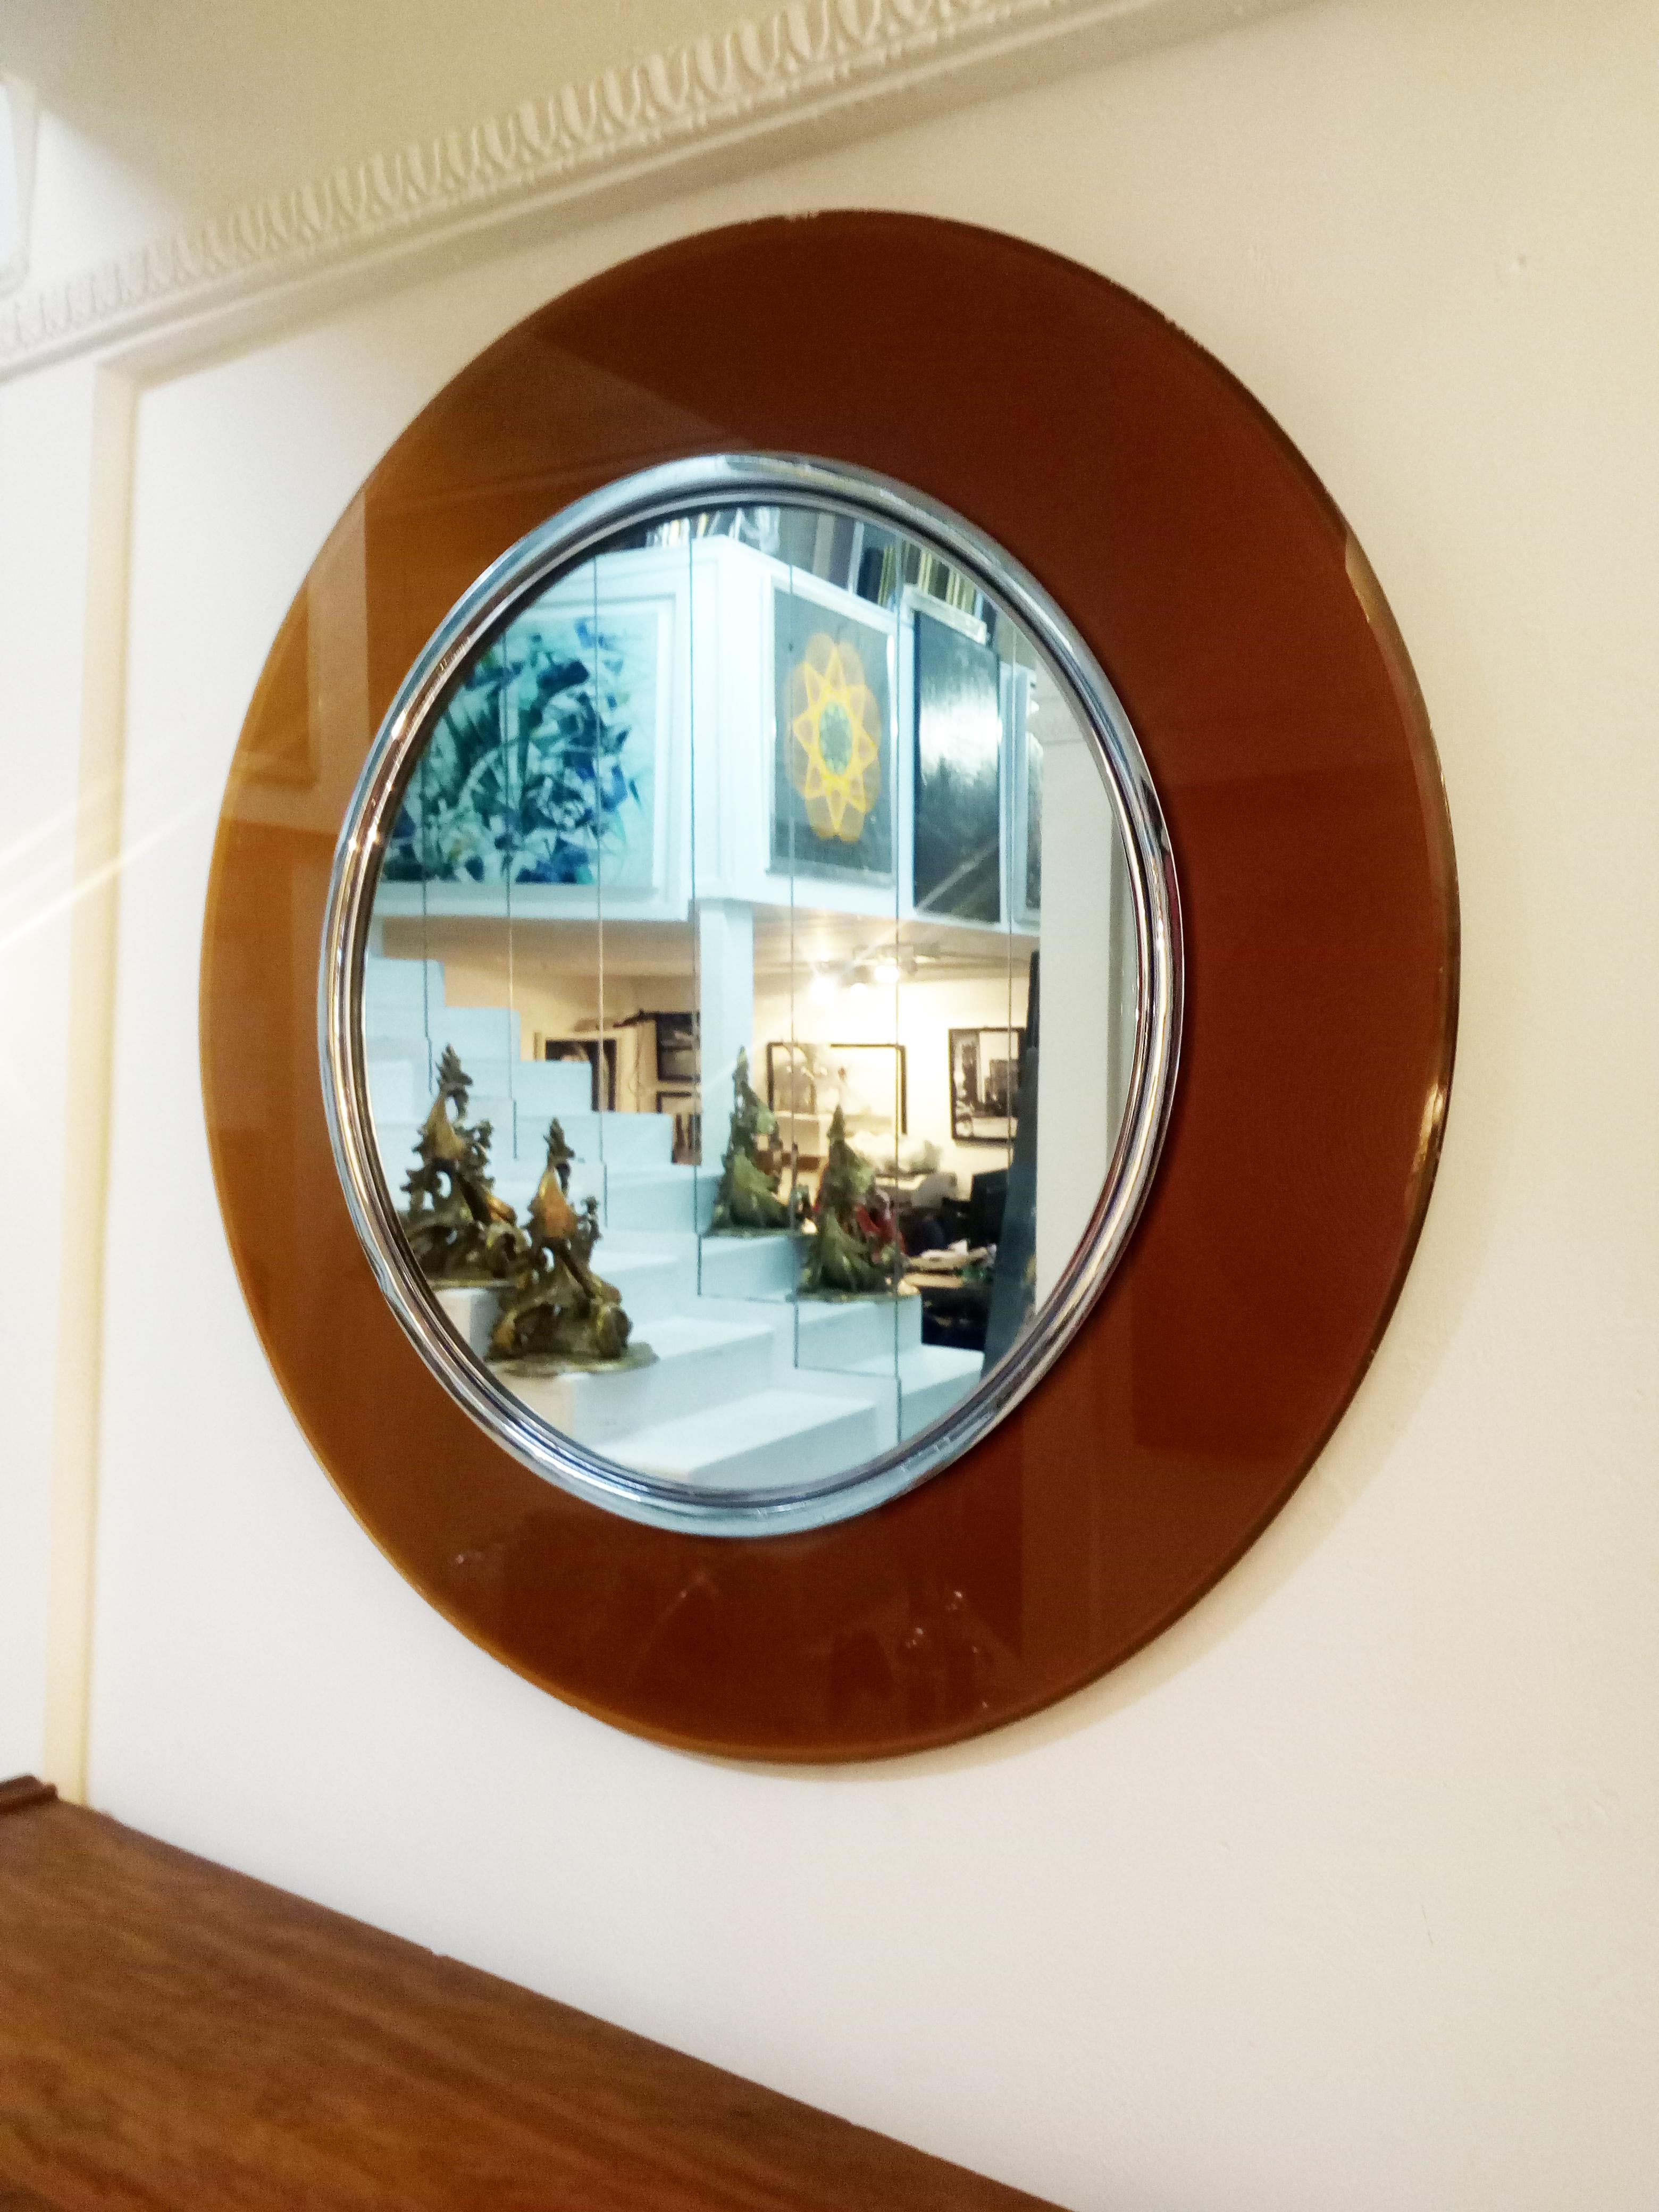 Colored, curved and beveled glass framing mirrored glass encased in brass trim.
This round mirror is created by Max Ingrand who works a lot with glass. This beautiful mirror is surrounded by a transparent silver amber color glass which is held